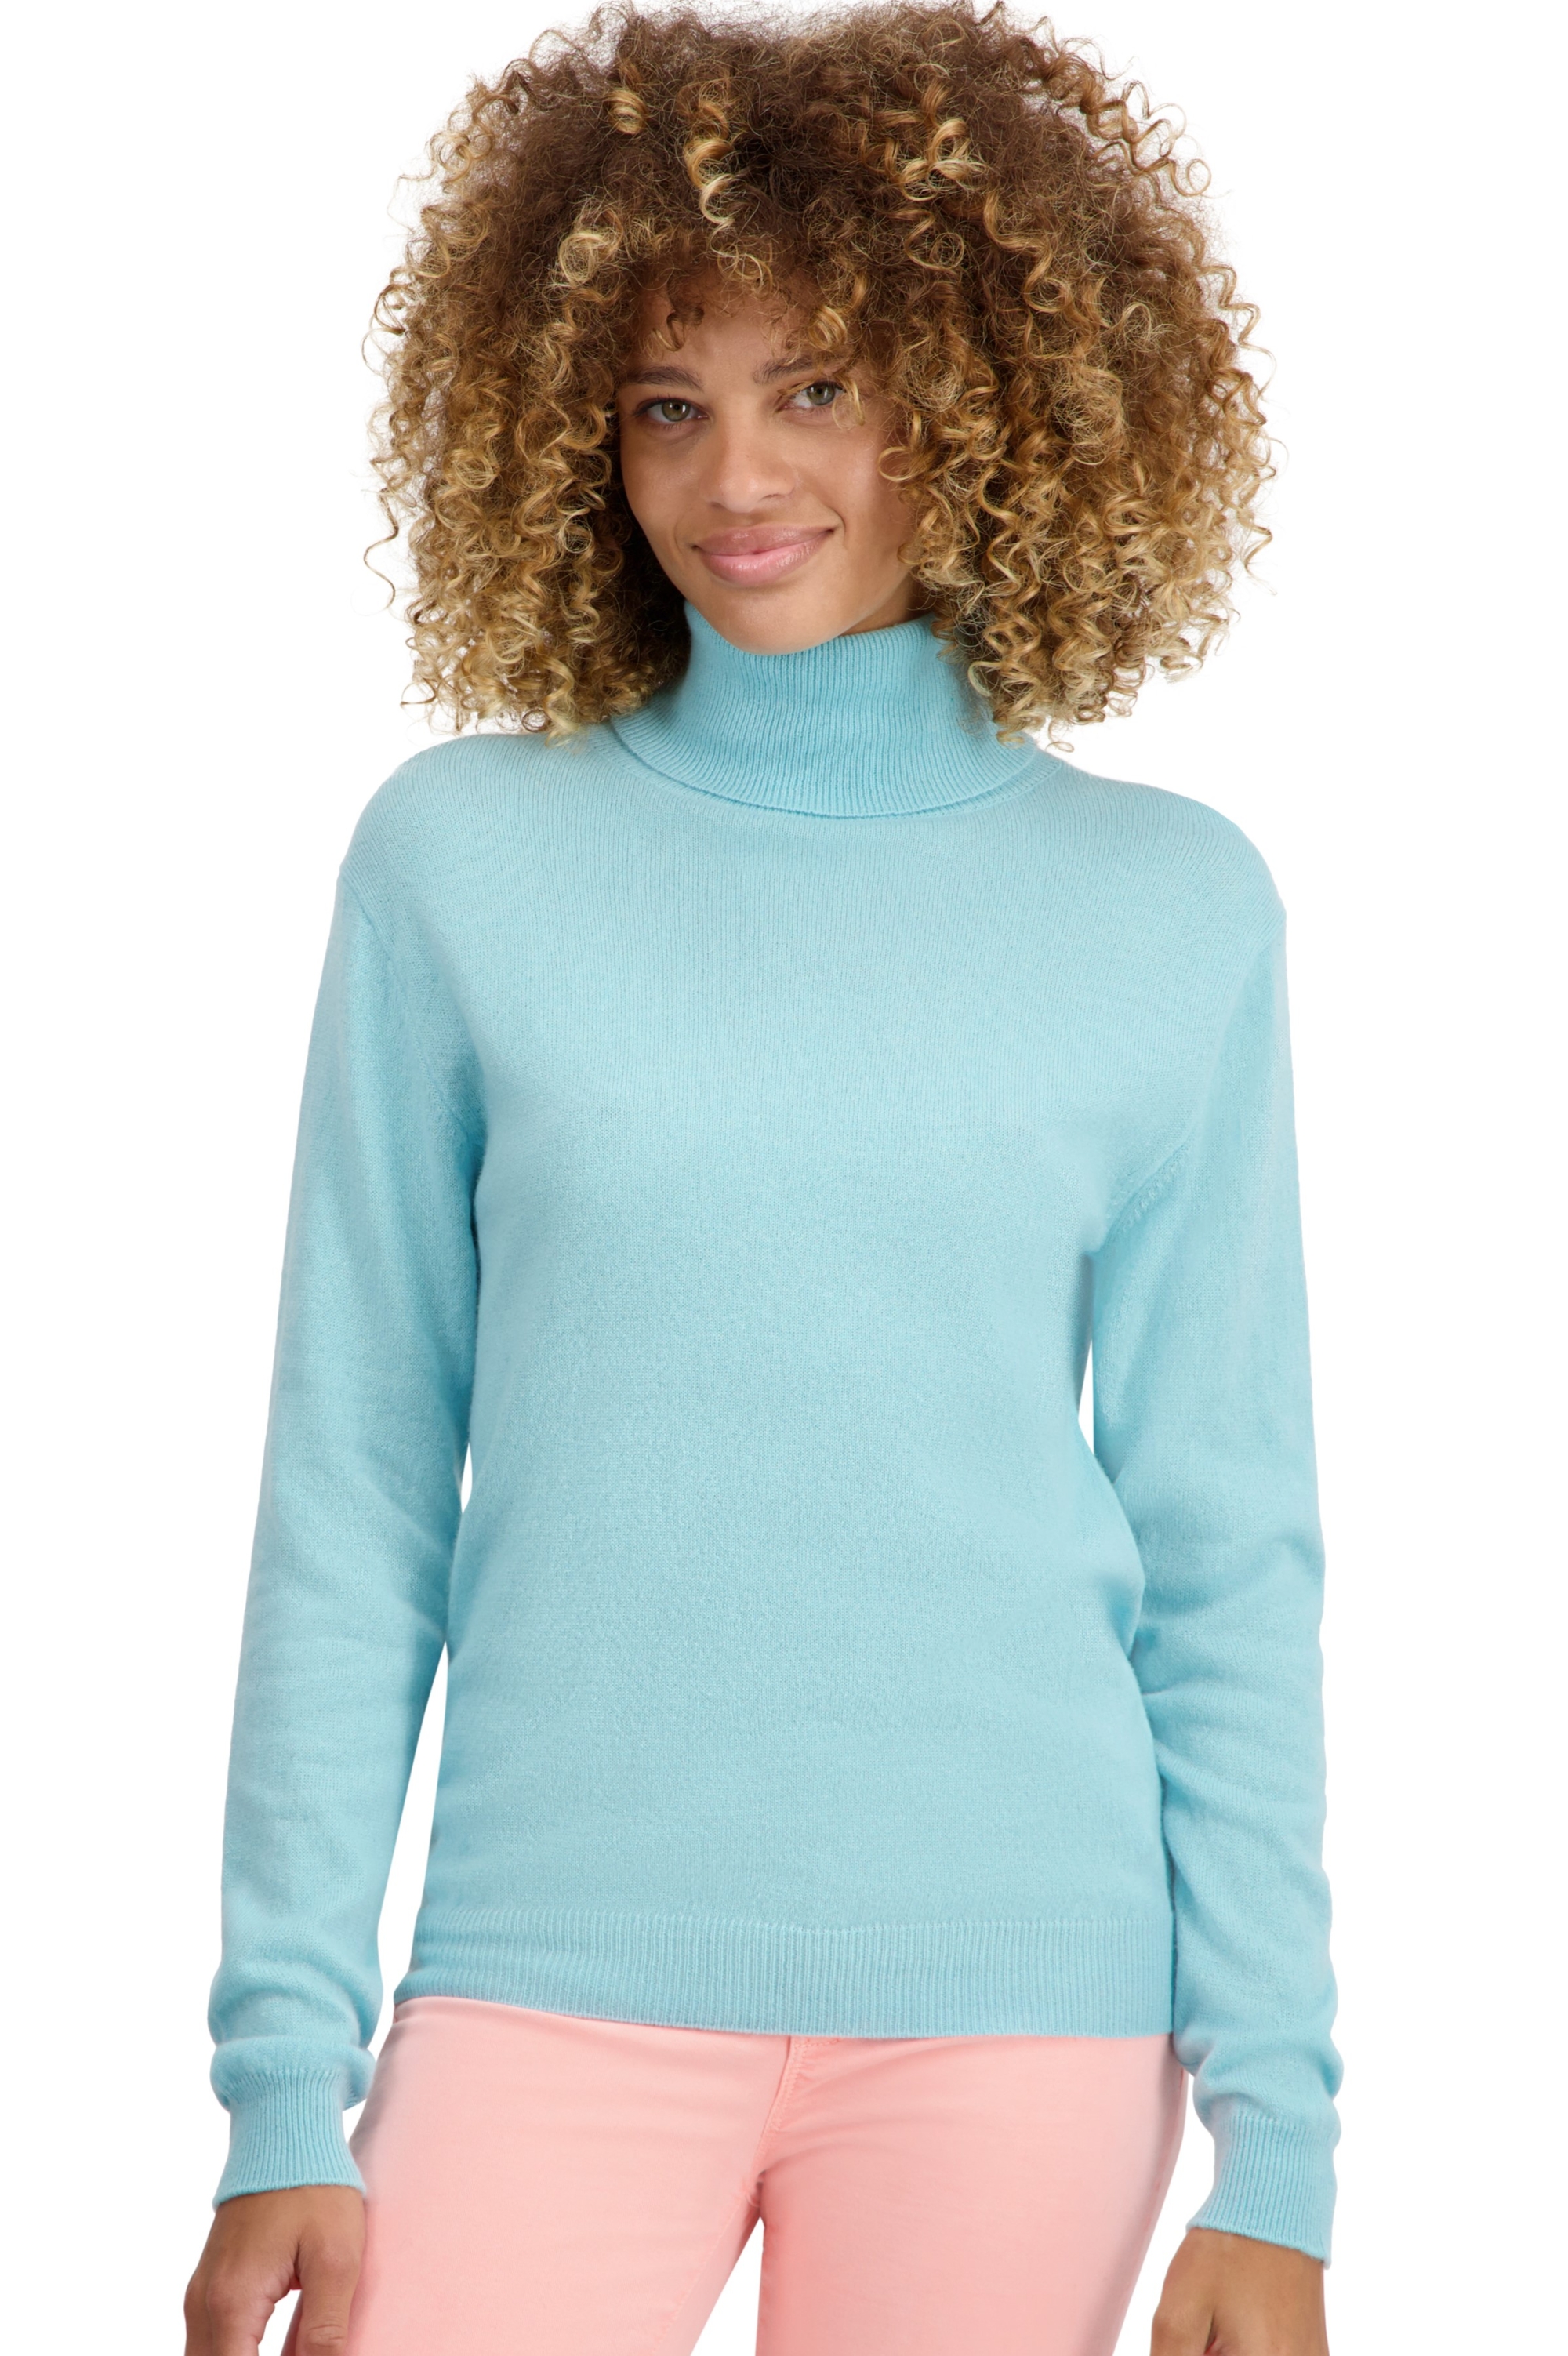 Cashmere ladies basic sweaters at low prices tale first aquilia s